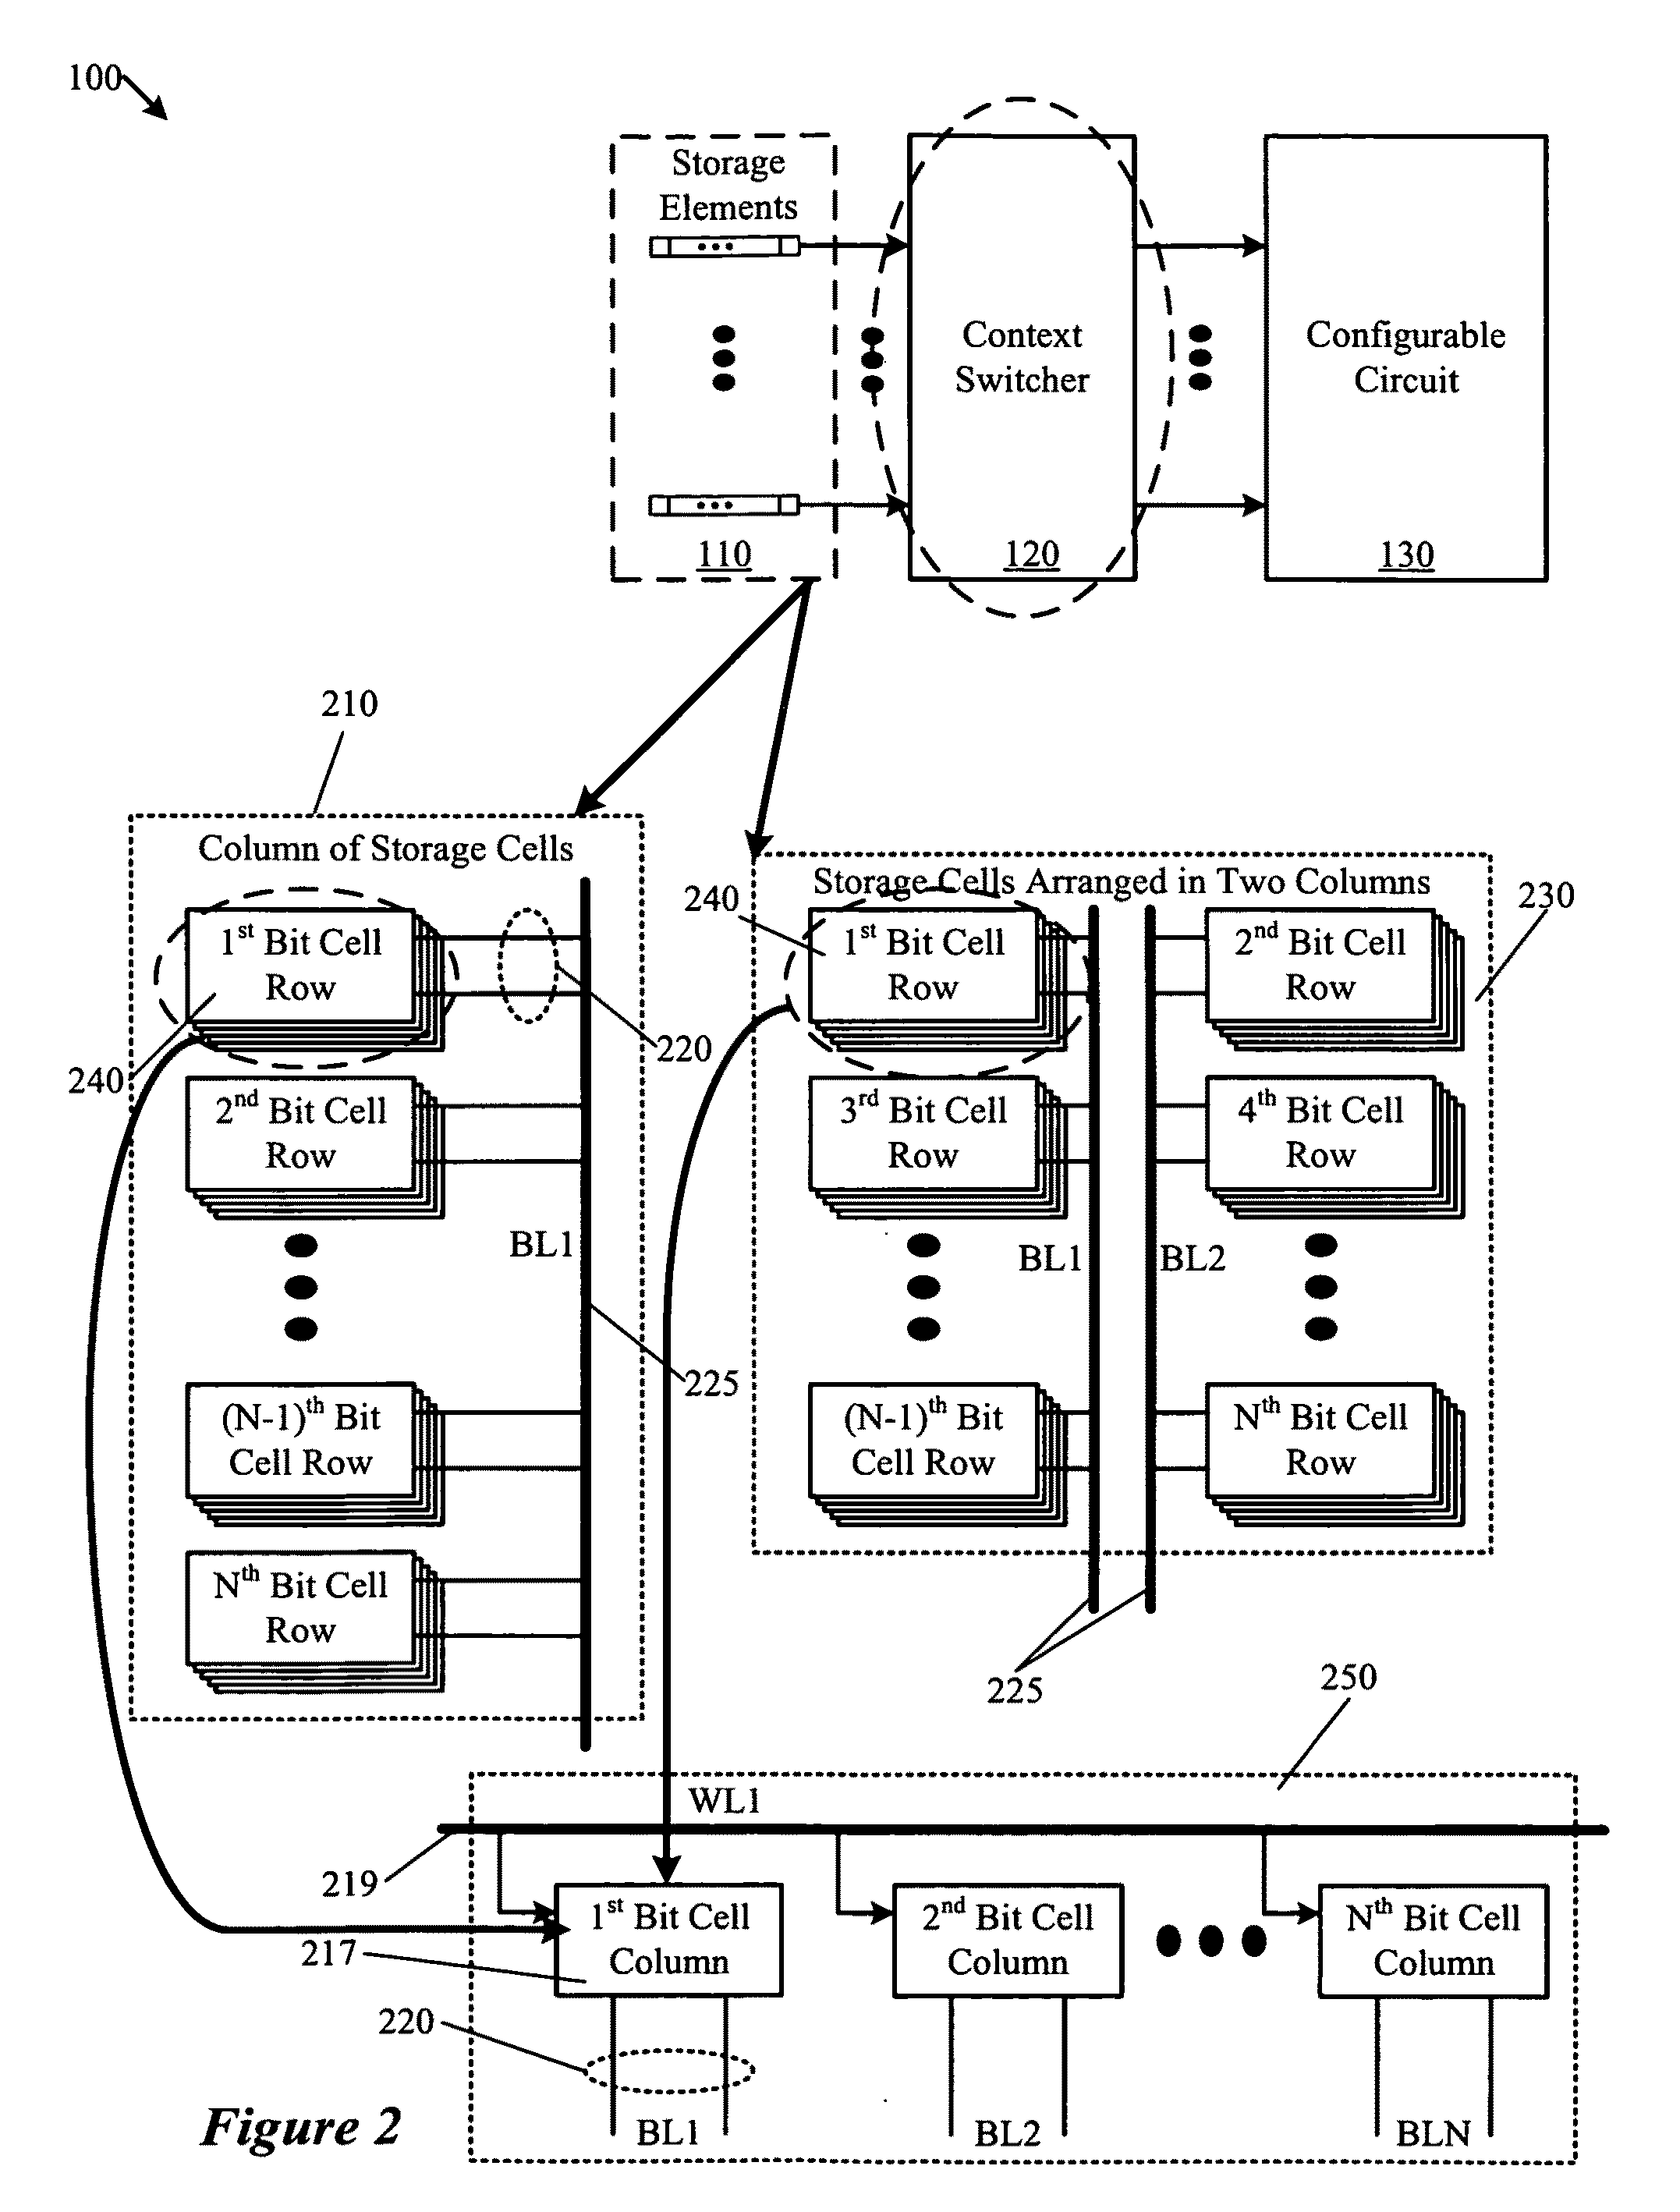 Reading configuration data from internal storage node of configuration storage circuit